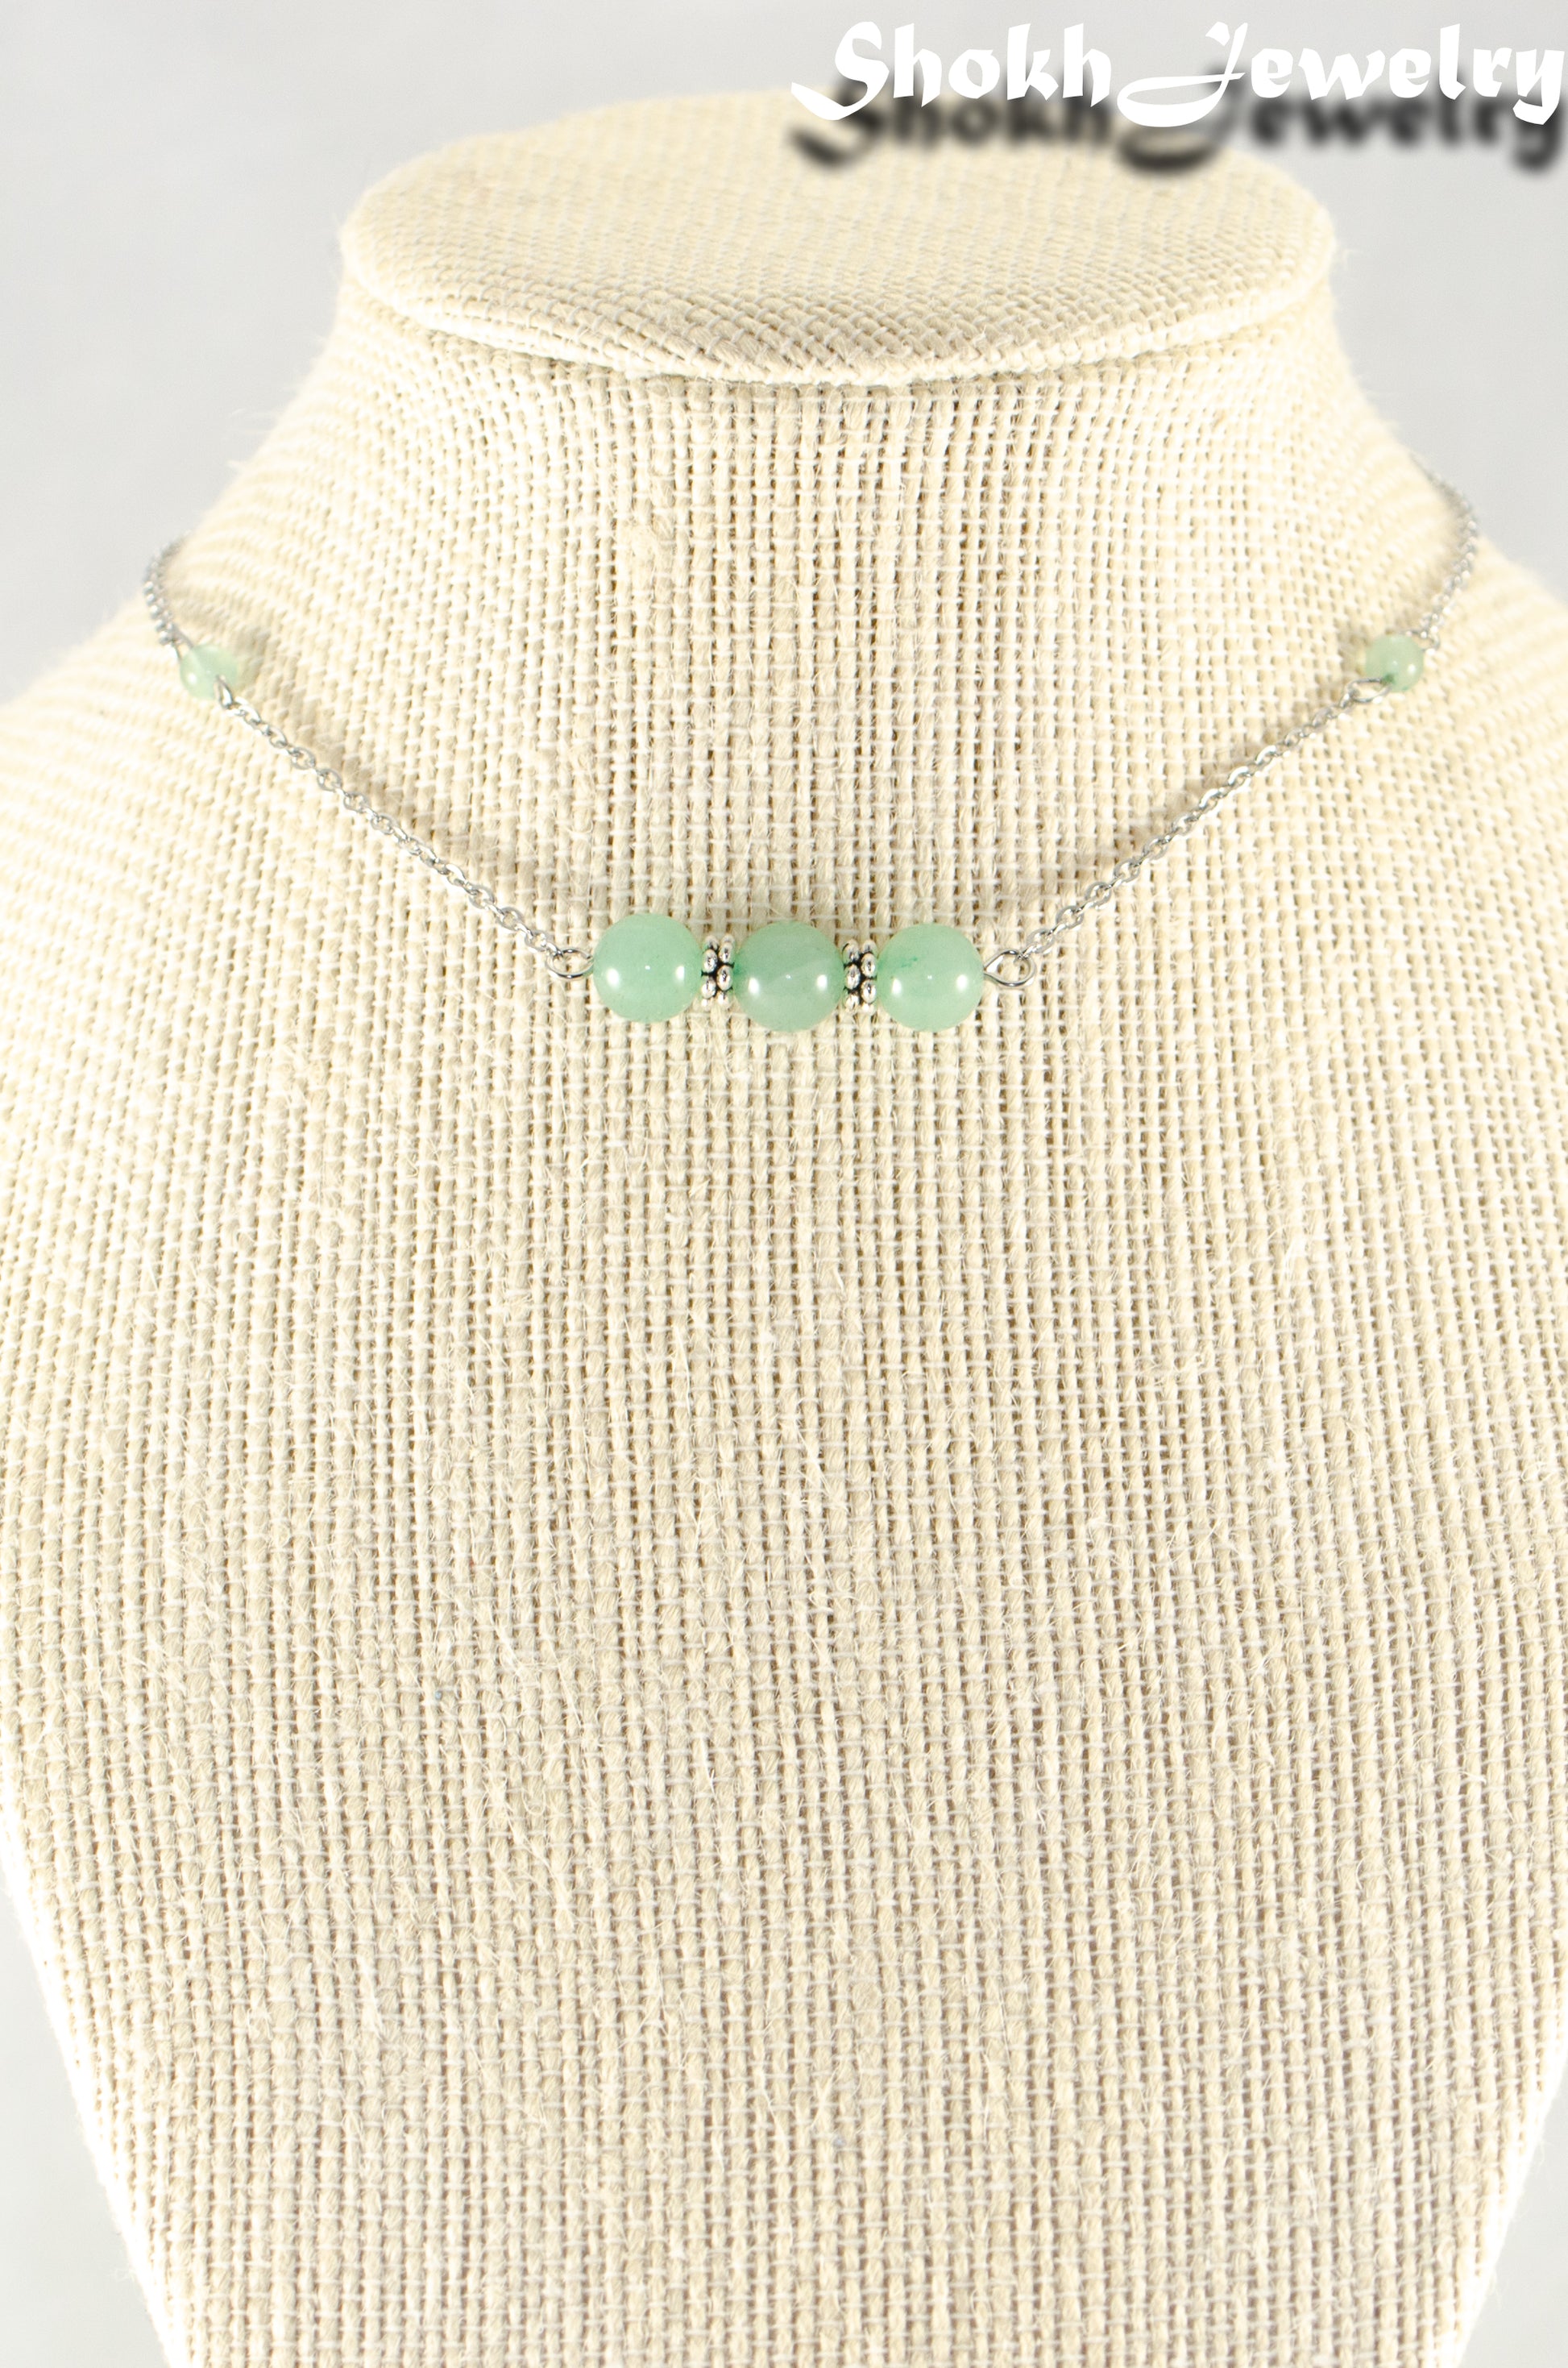 Close up of Natural Green Aventurine and Chain Choker Necklace.